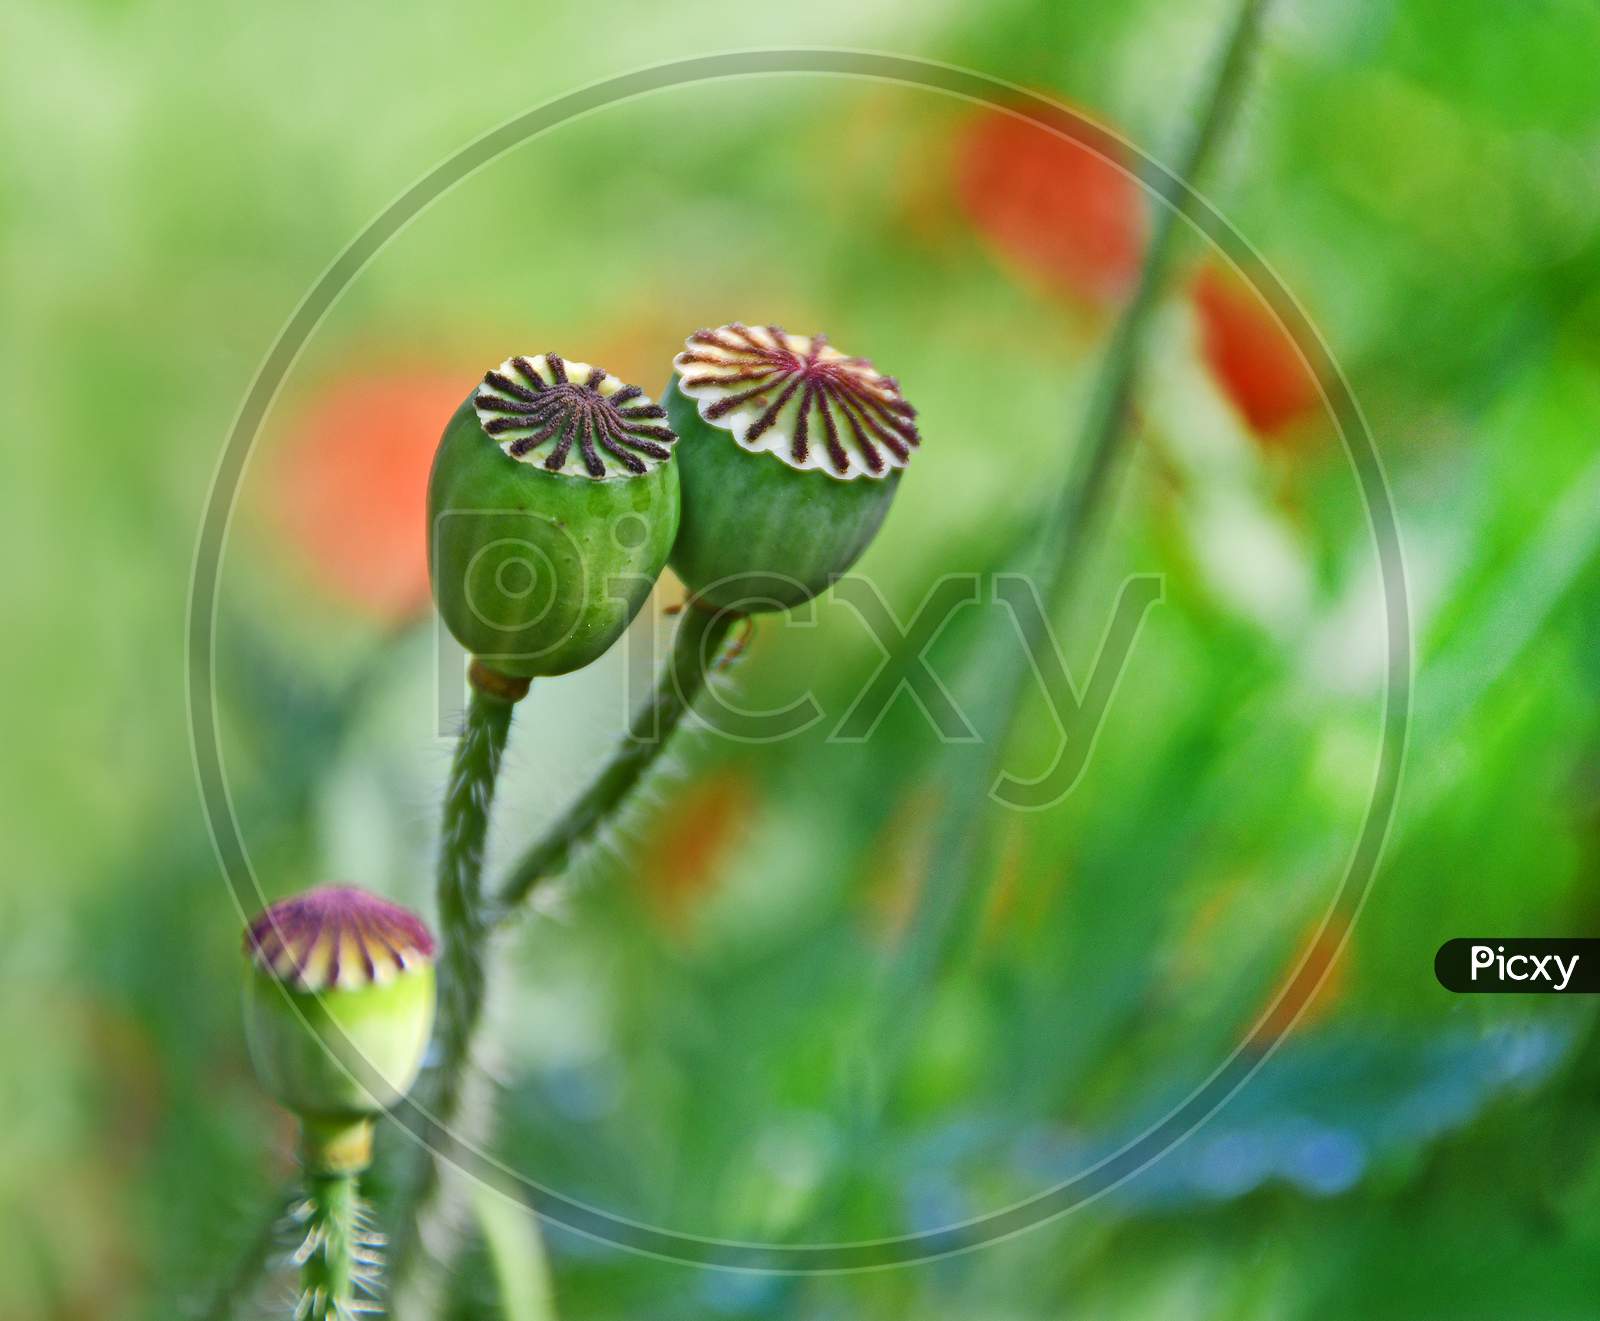 Red Corn Poppy Flower Seeds With Blur Background In The Spring Season.